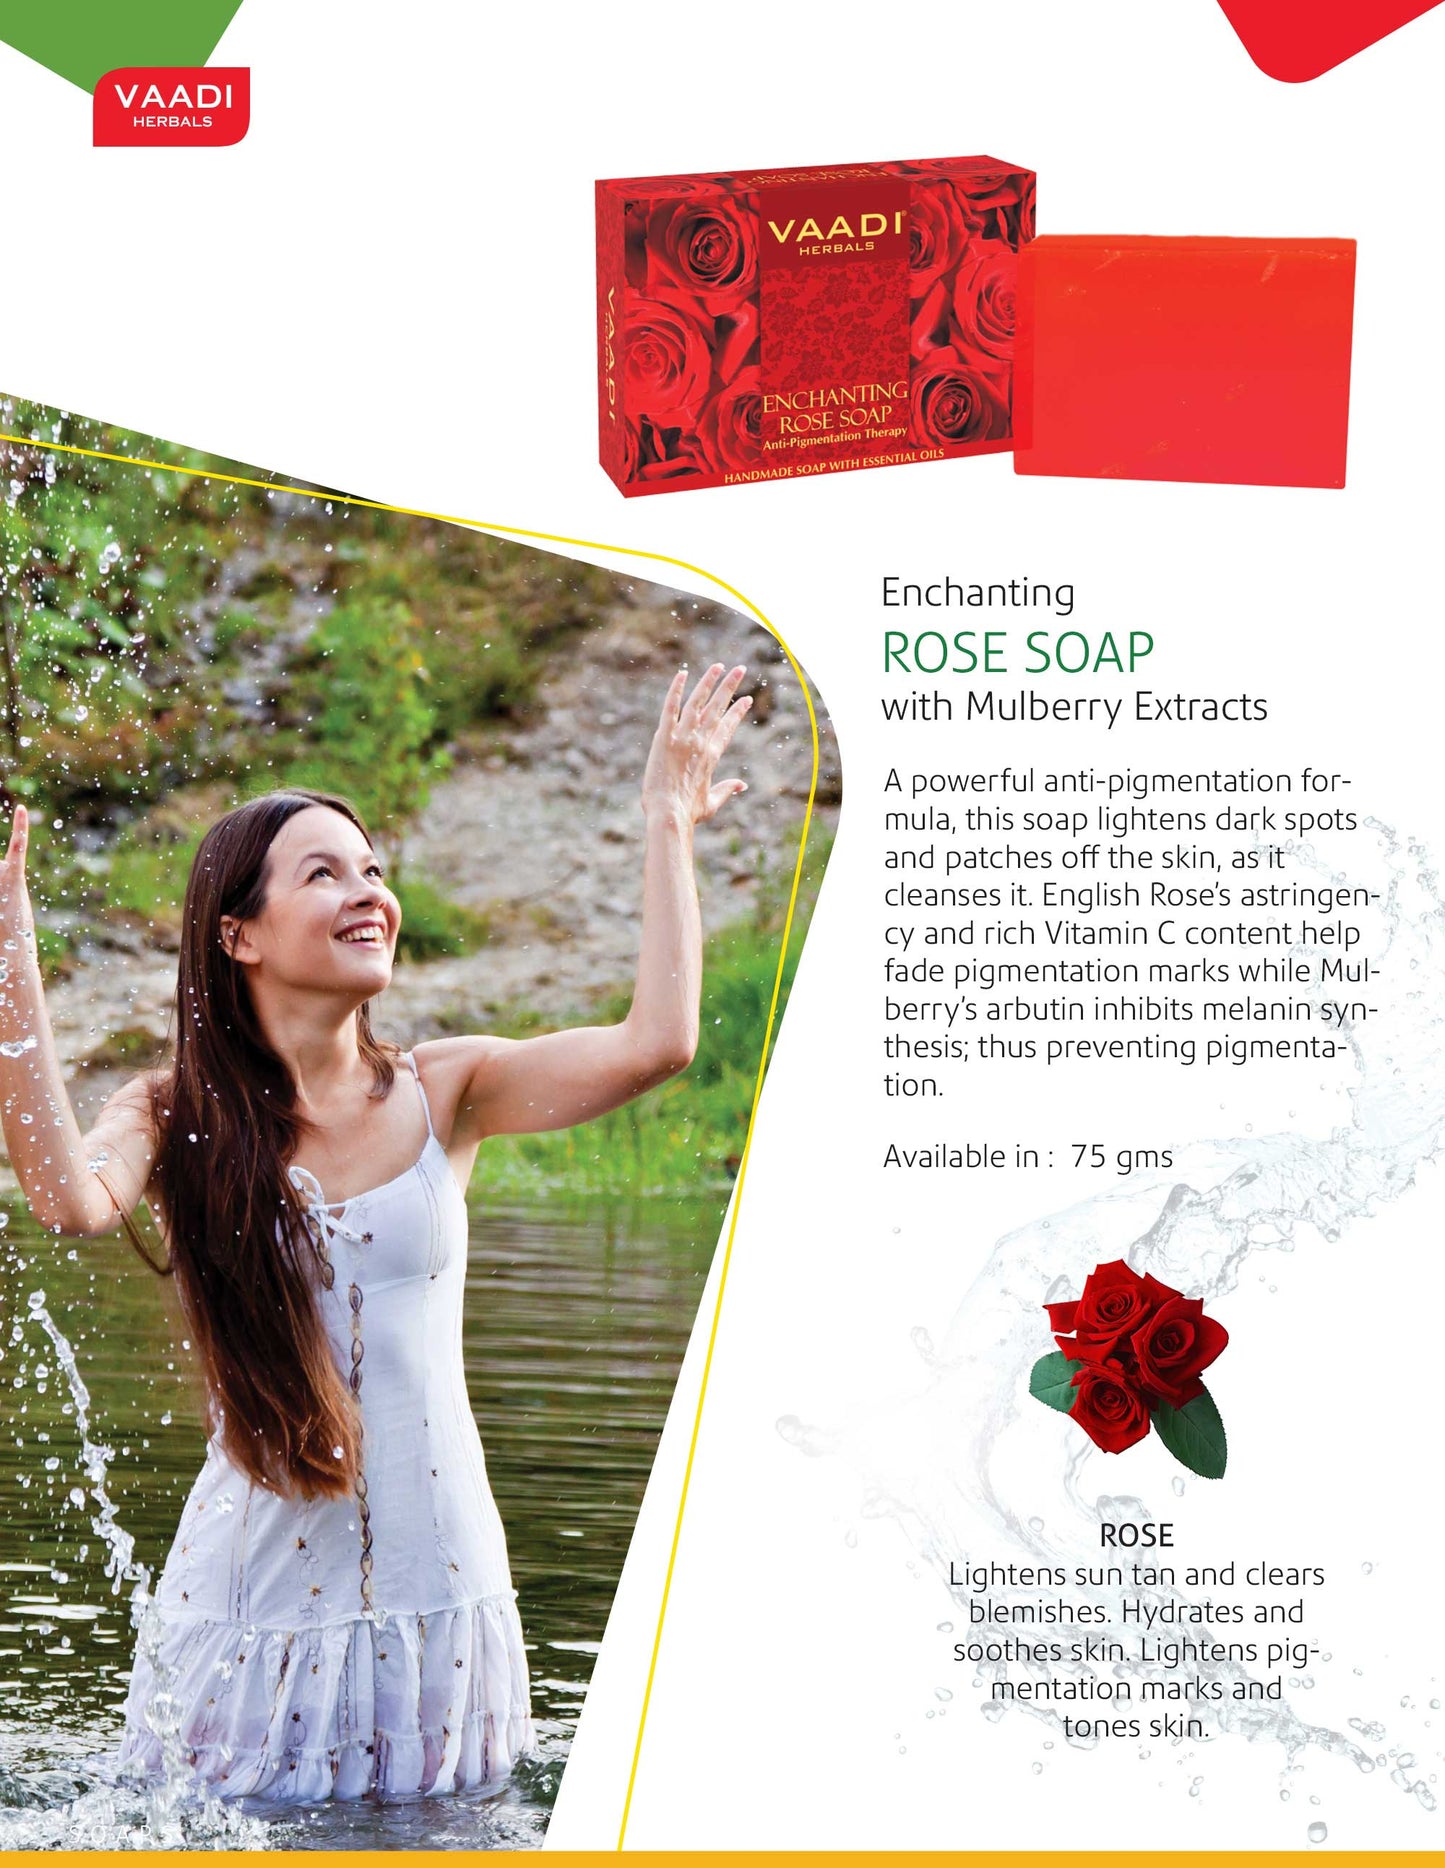 Enchanting Organic Rose Soap with Mulberry Extract - Anti Pigmentation Therapy (3 x 75 gms/2.7 oz)